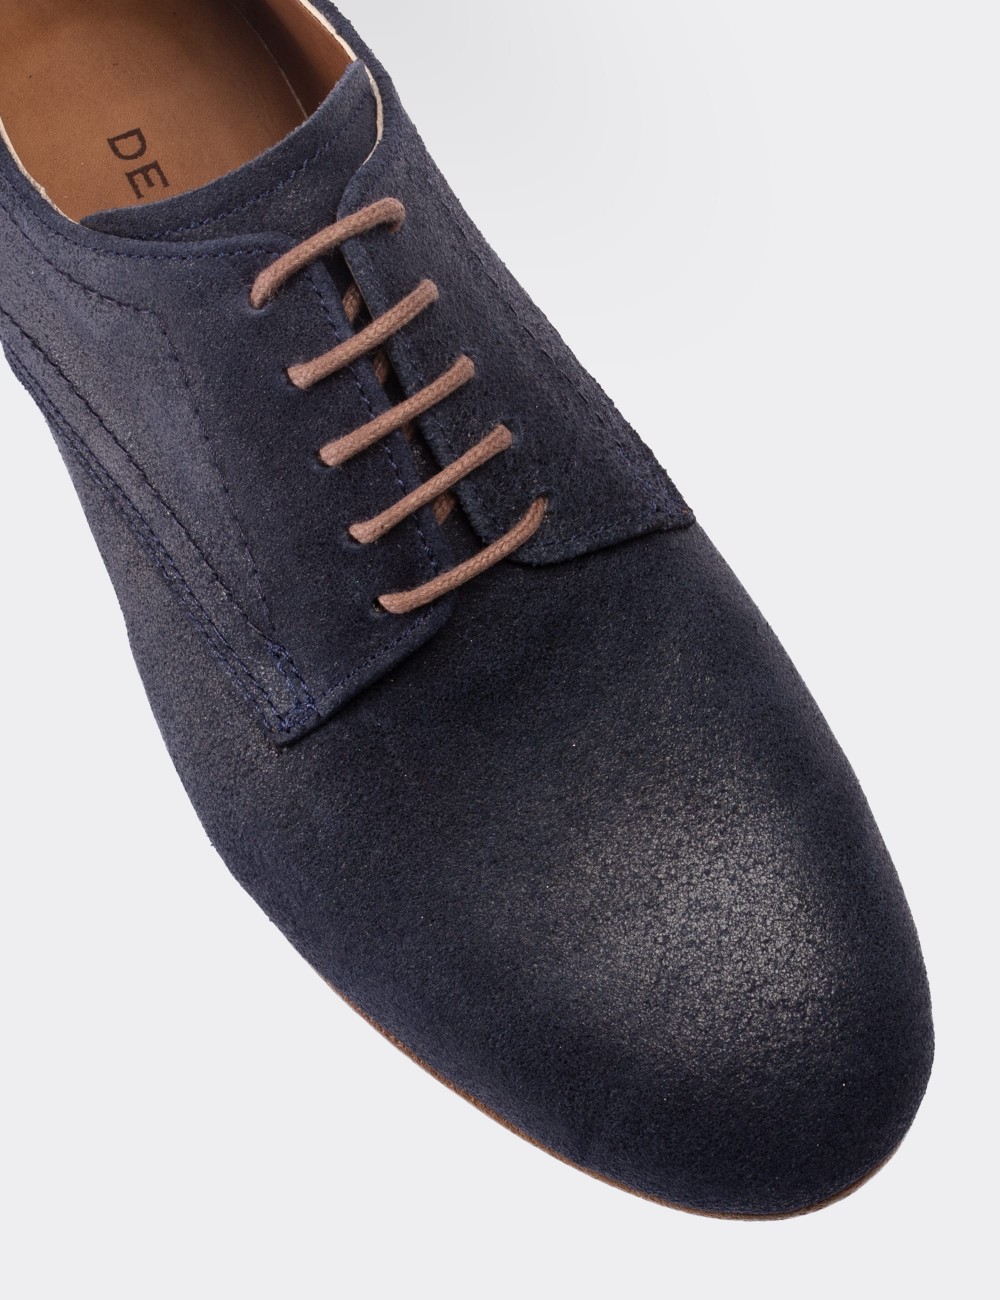 Navy Suede Leather Lace-up Shoes - 01430ZLCVC01